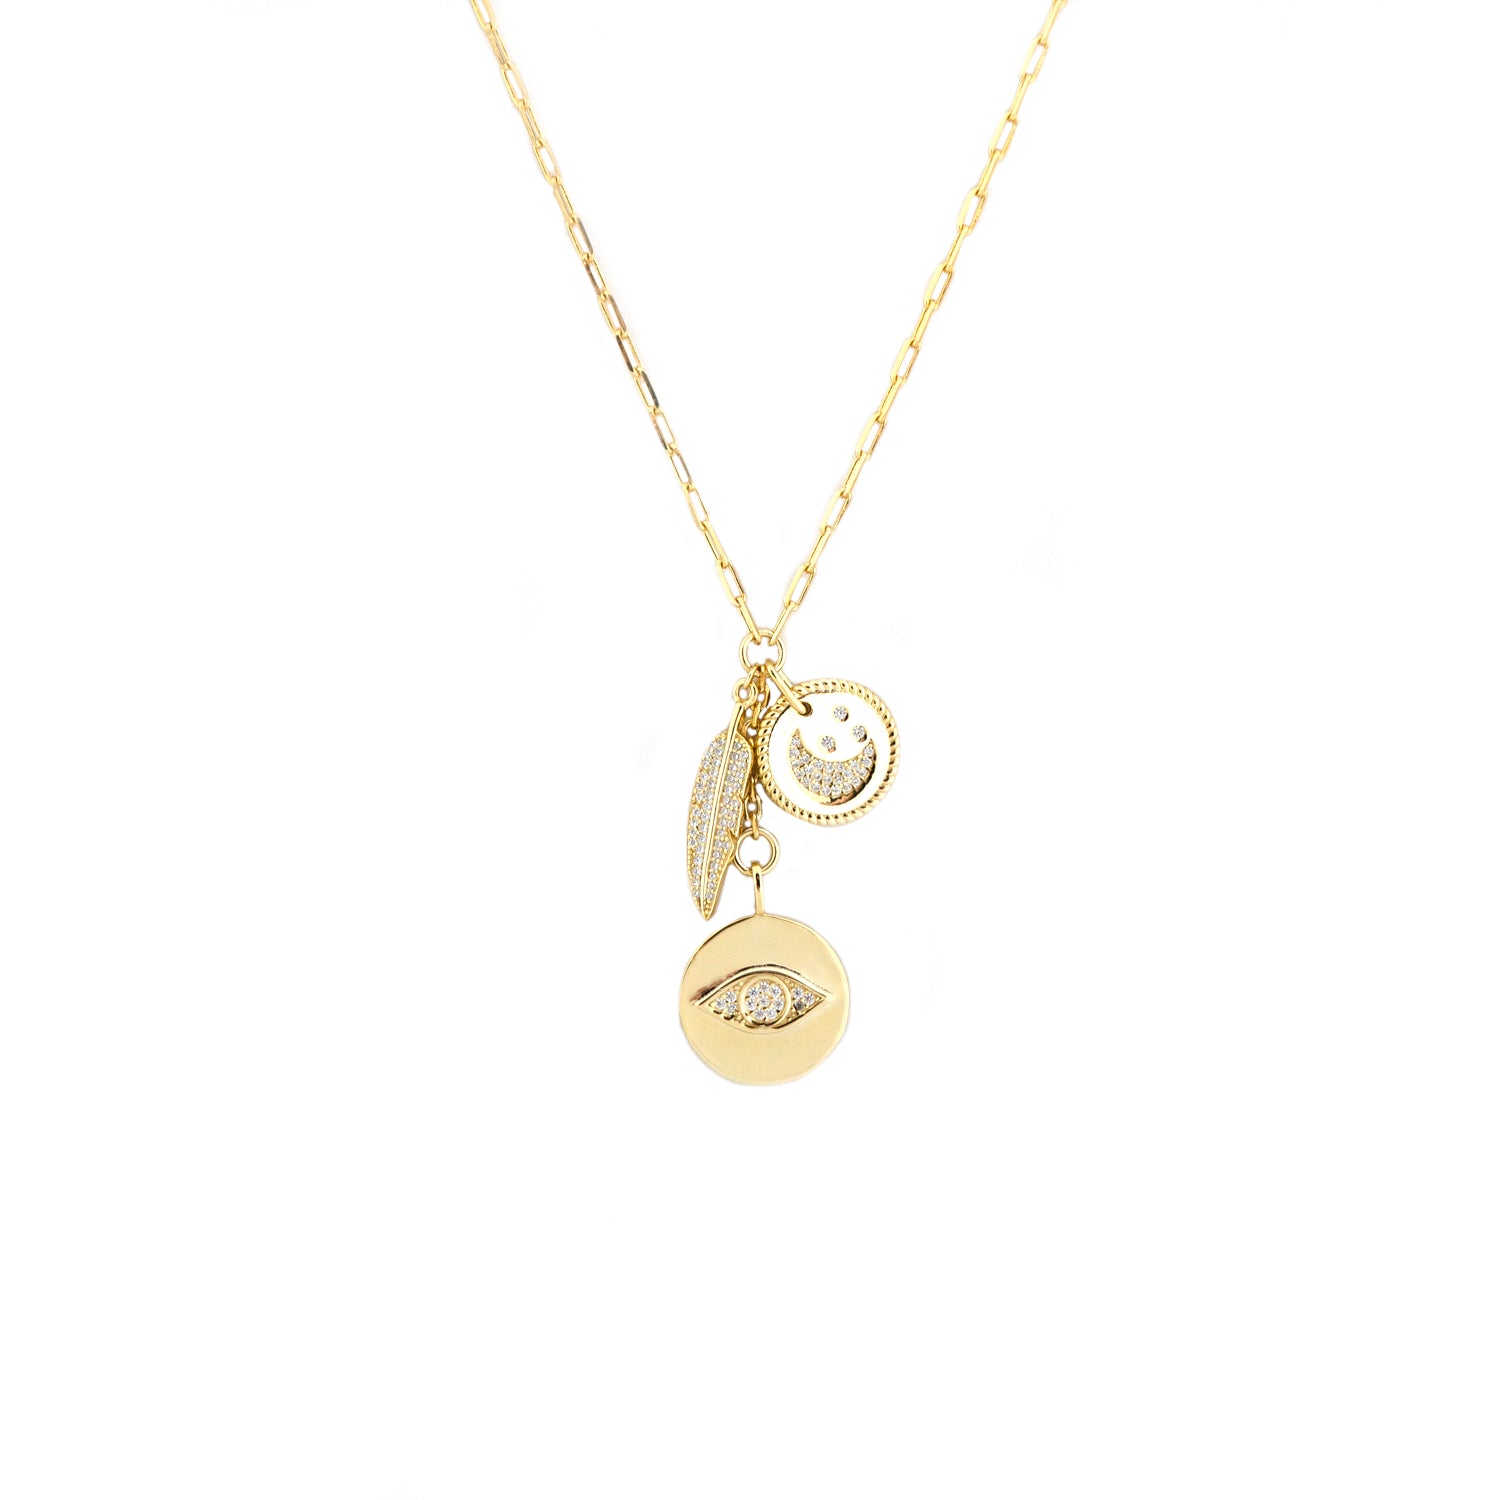 gold plated delicate layered chain with enamel colored charms – Marlyn  Schiff, LLC